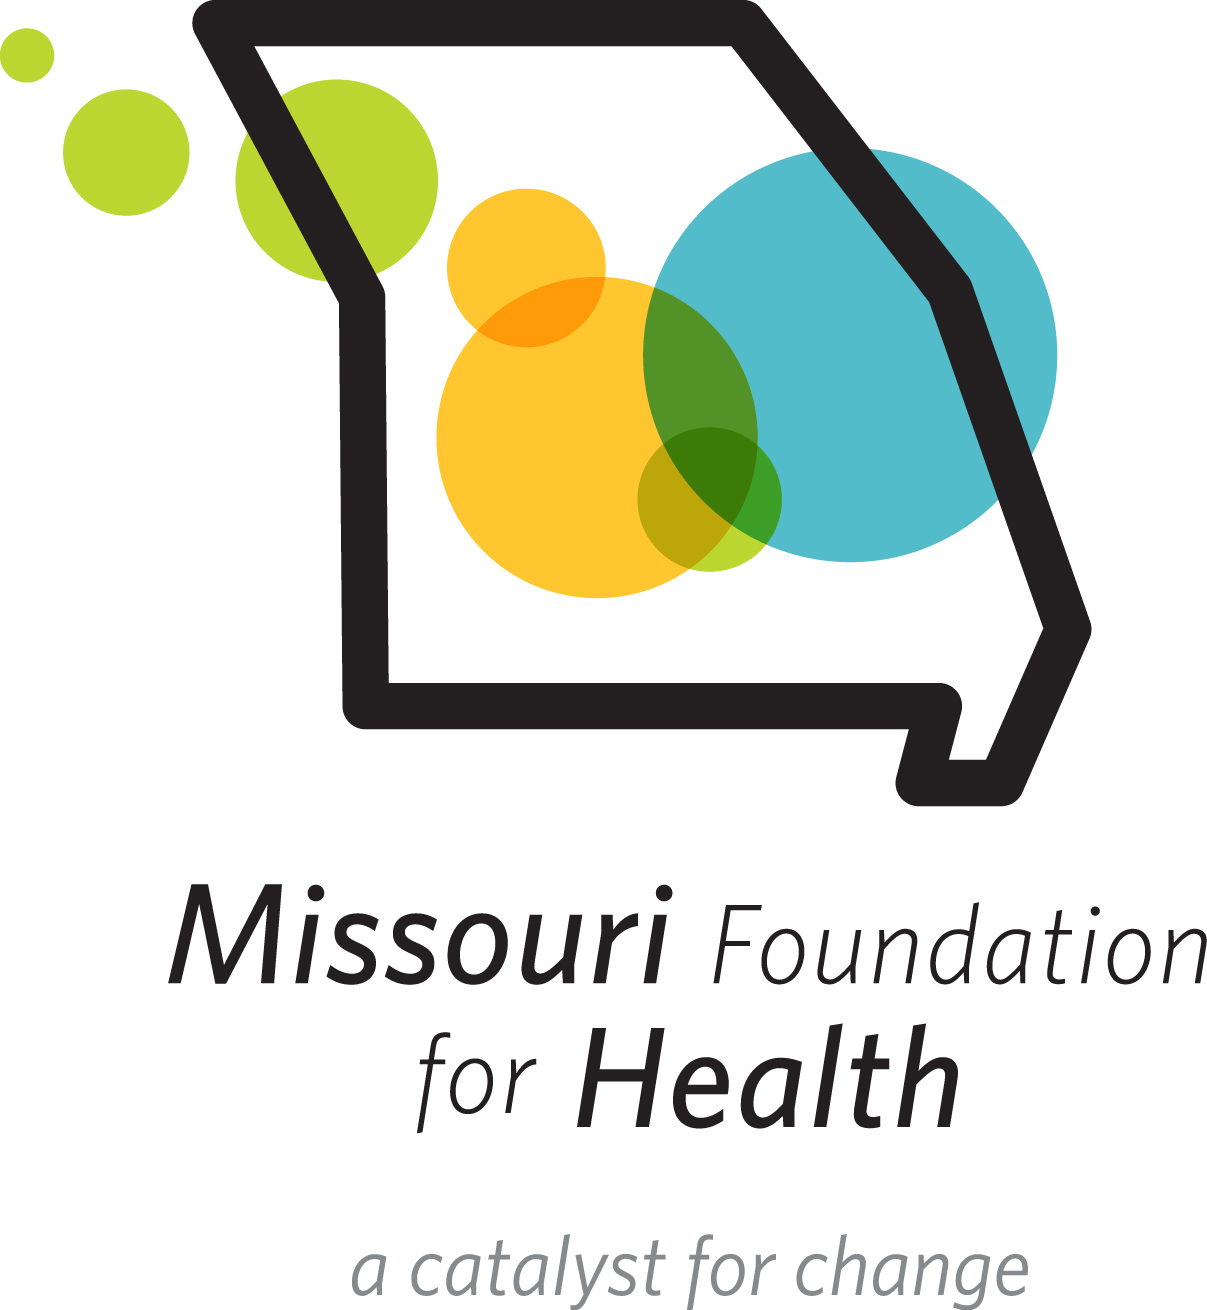 Missouri Foundation for Health logo. Outline of the state of Missouri, with multi-colored circles inside.